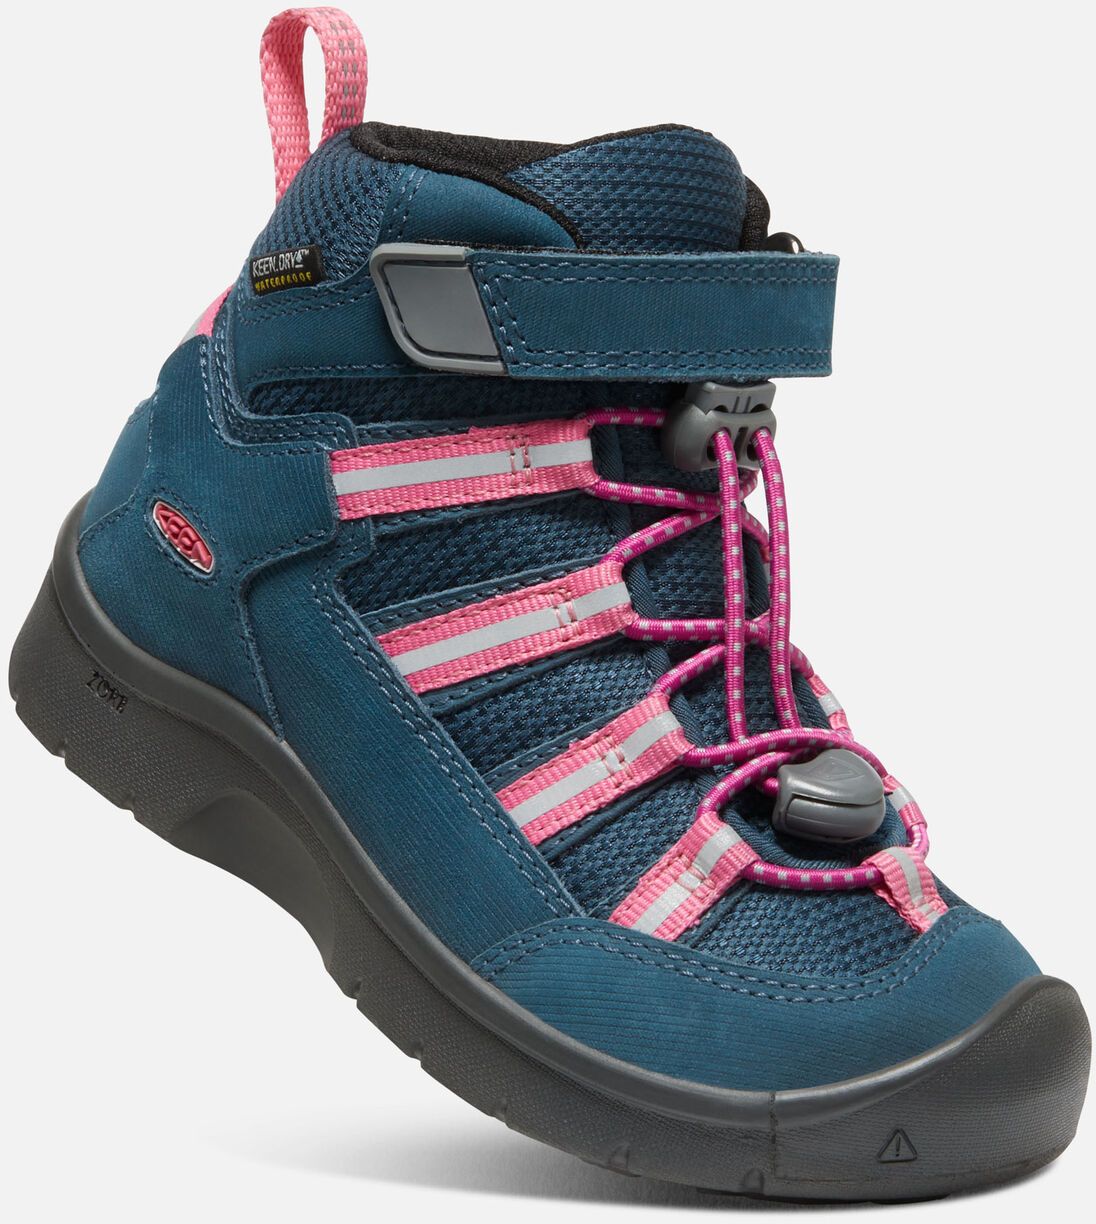 Keen HIKEPORT 2 SPORT MID WP YOUTH blue wing teal/fruit dove Velikost: 35 boty